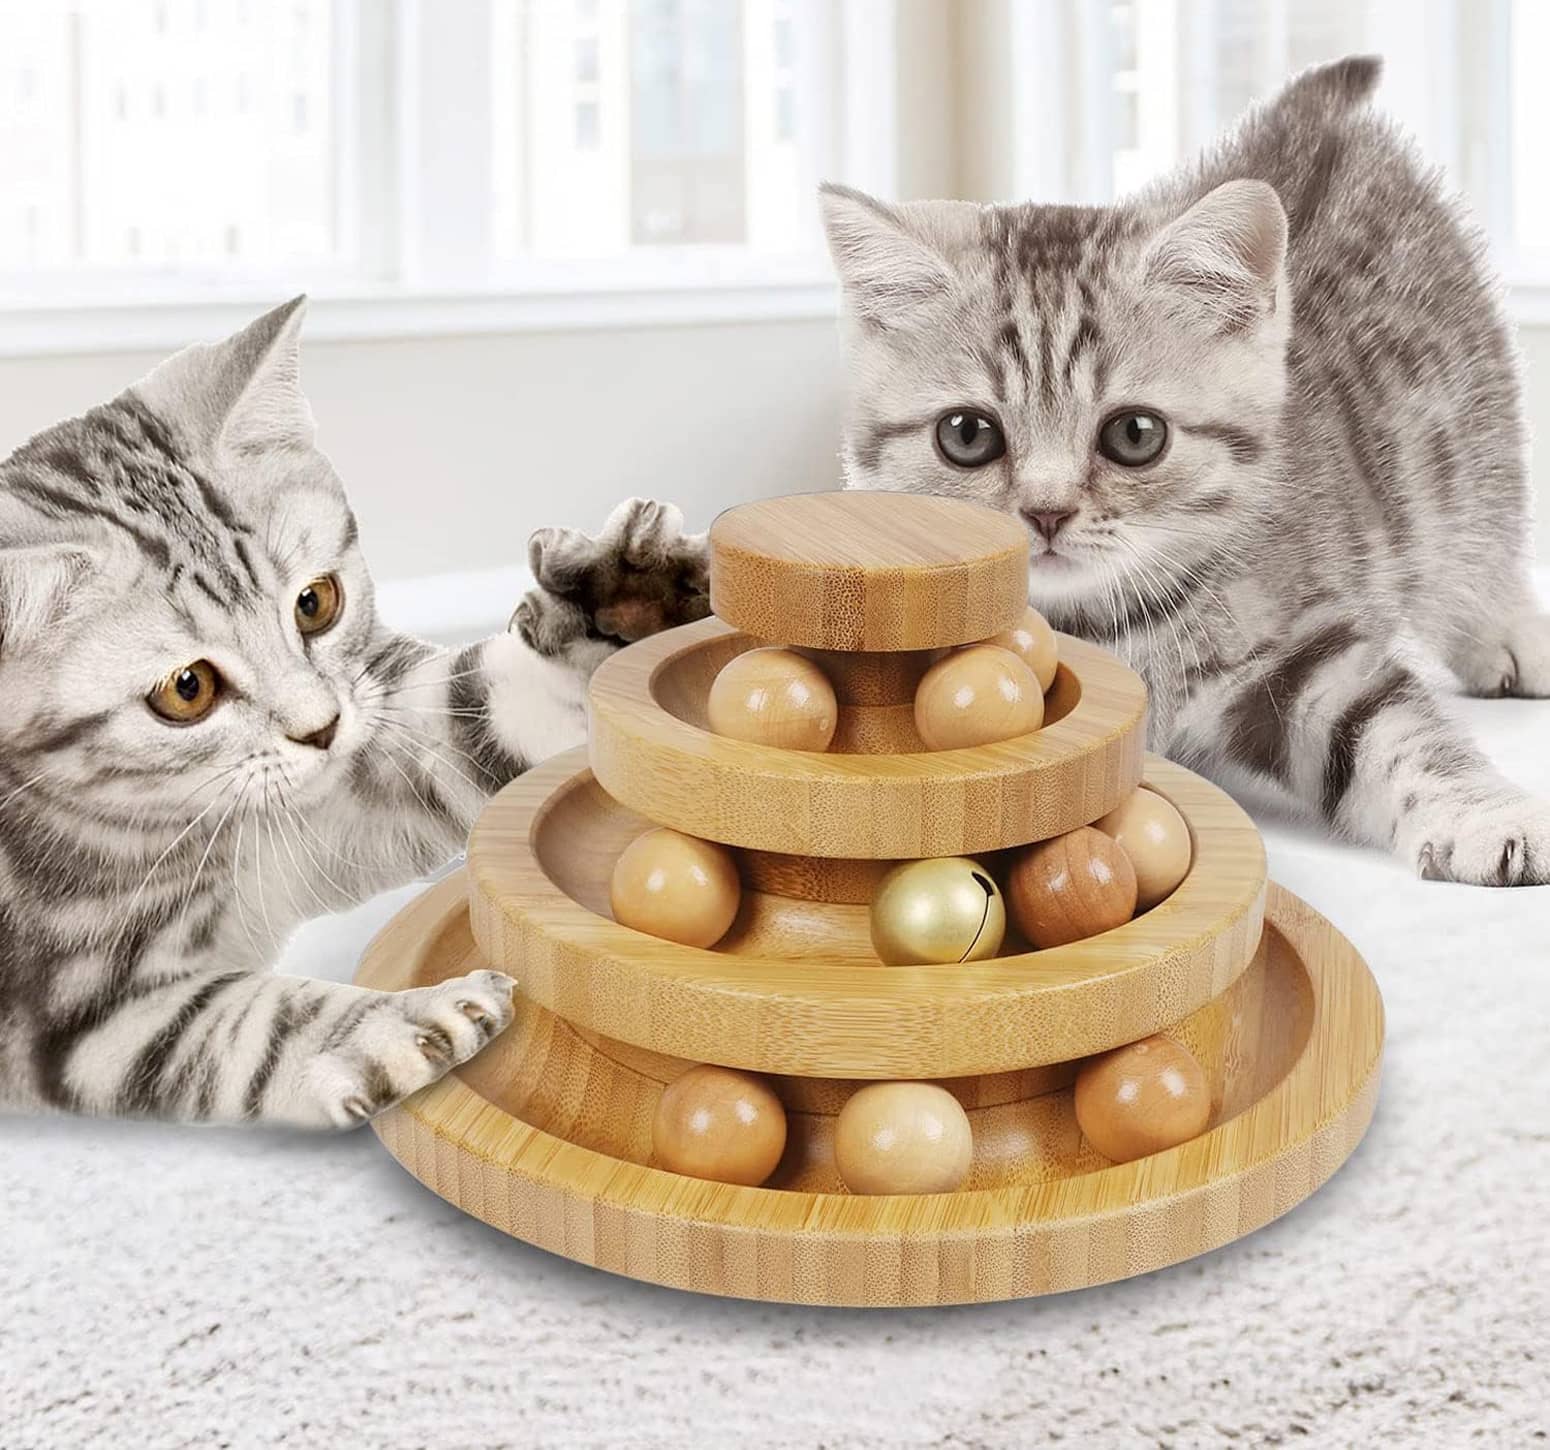 Classy 3-Tiered Wooden Ball Track Tower Cat Toy